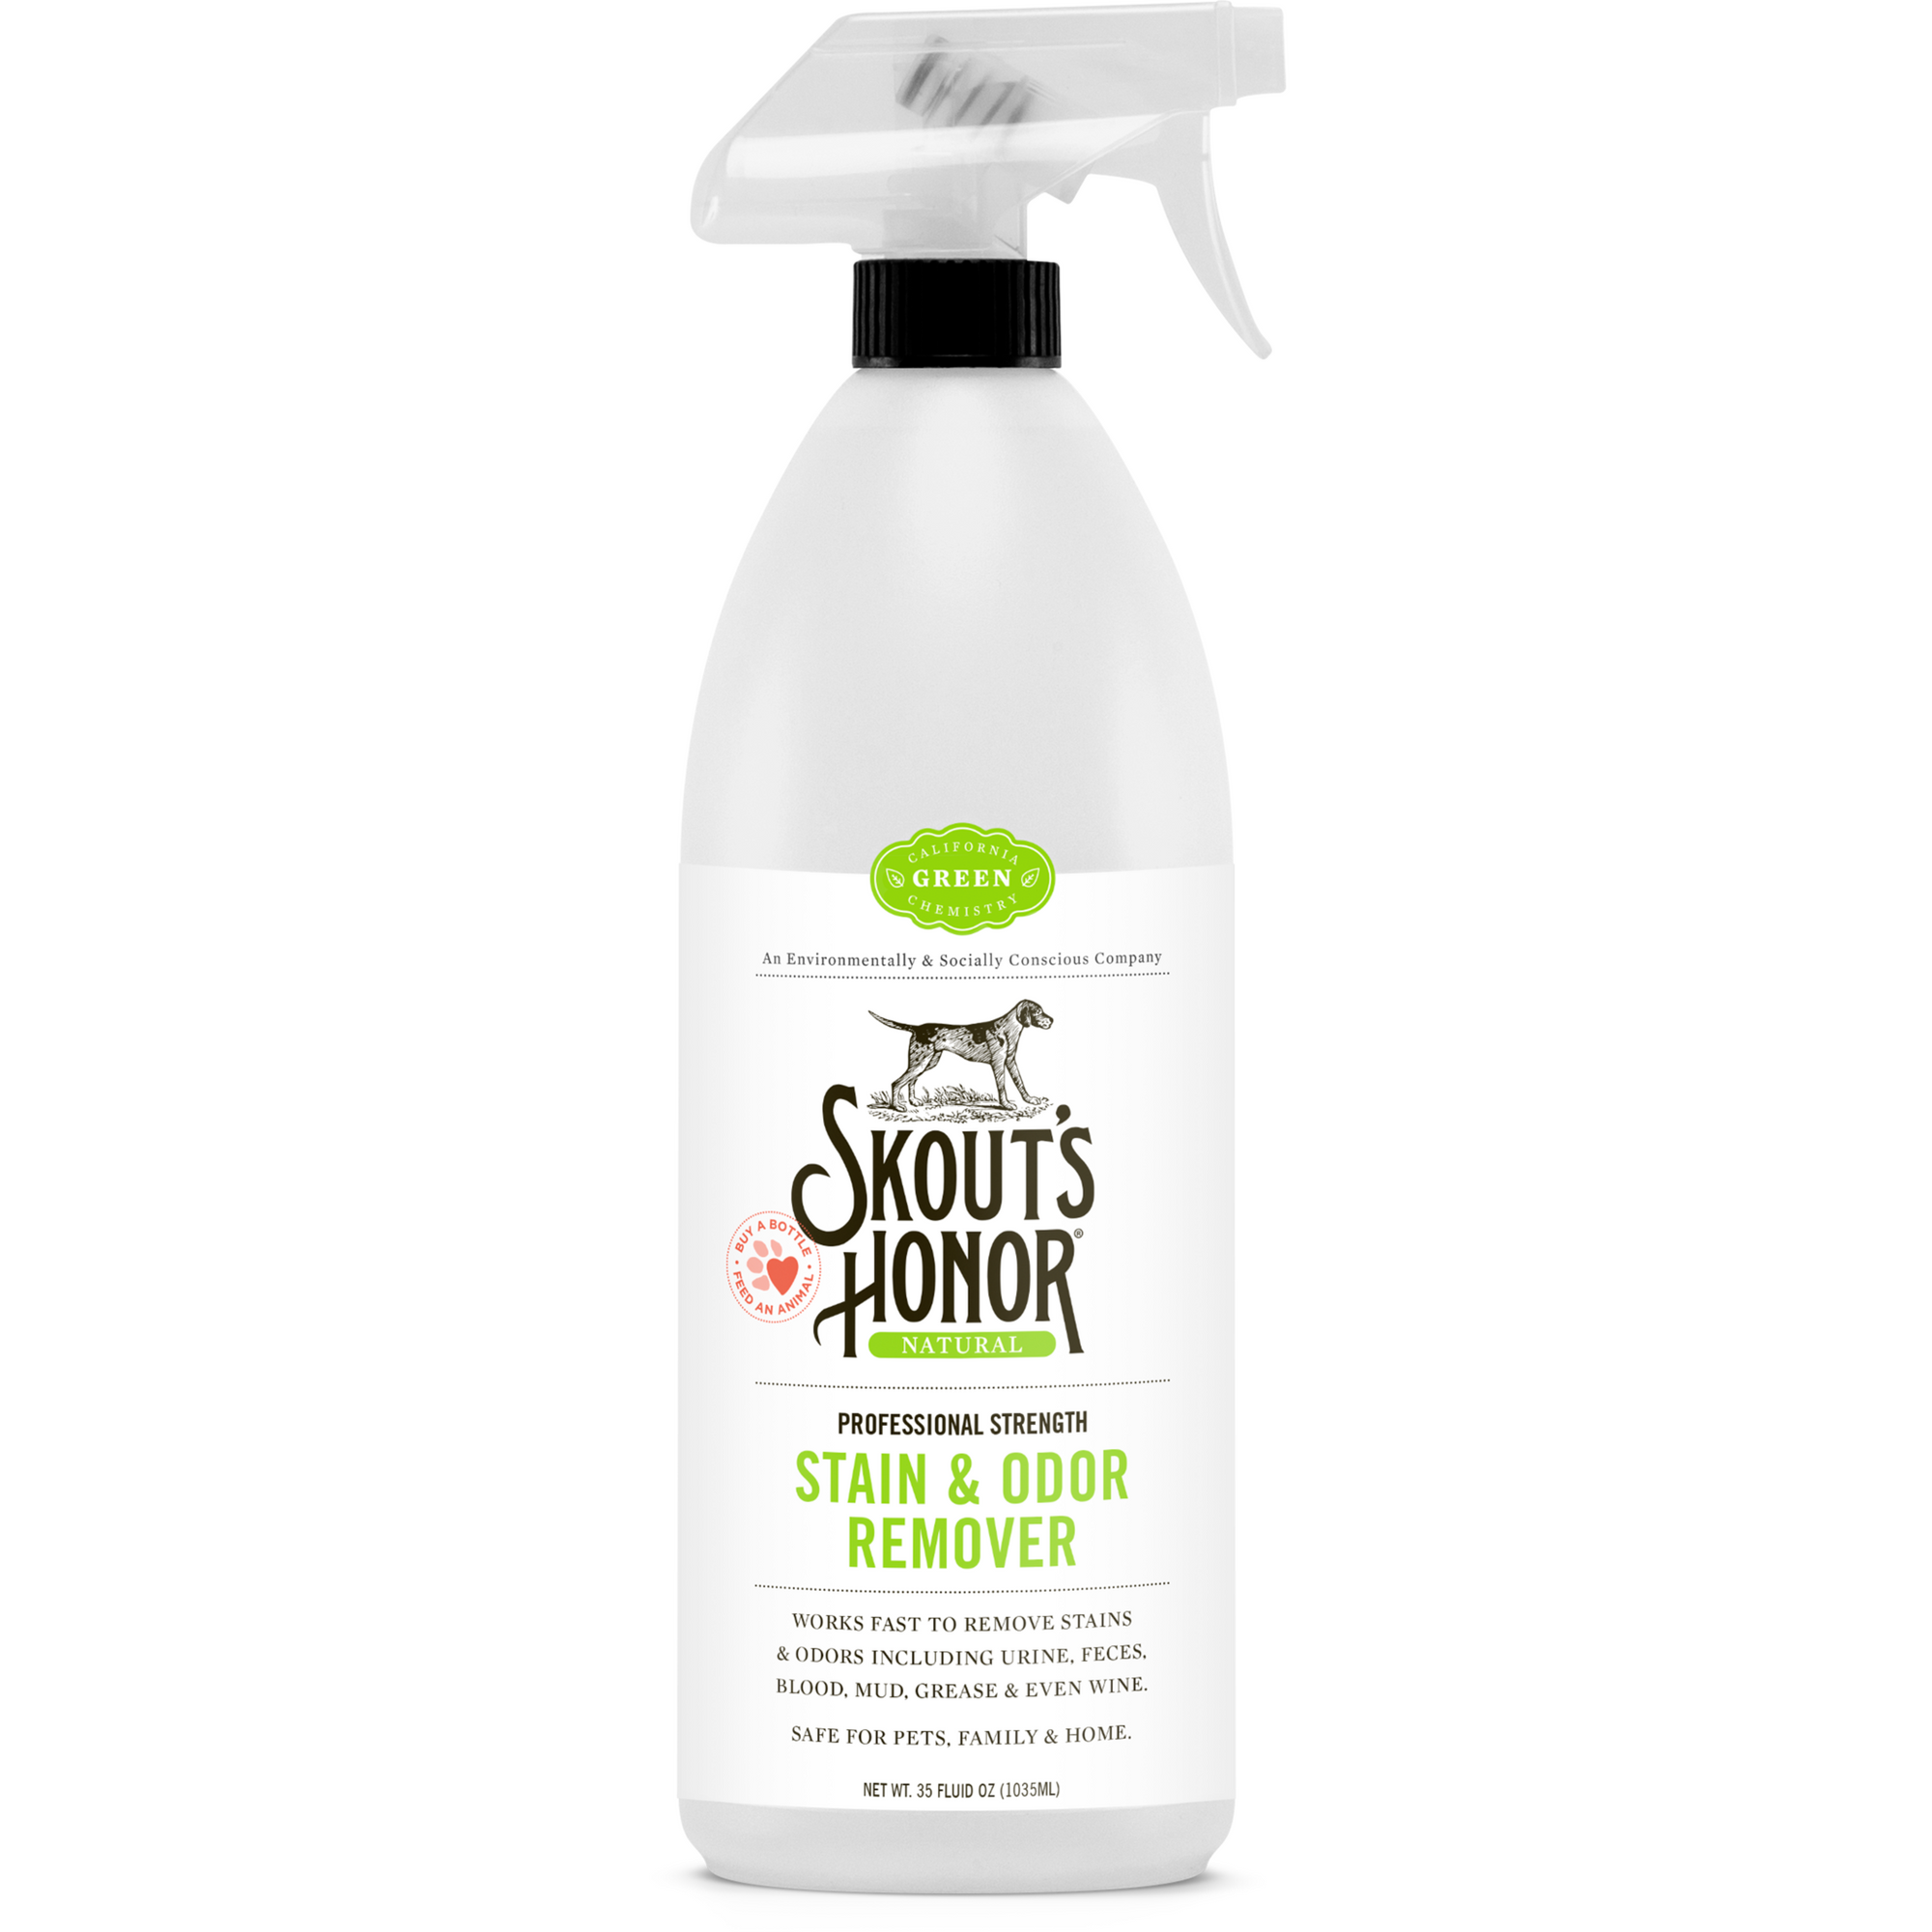 Skout's Honor - Stain & Odor Remover